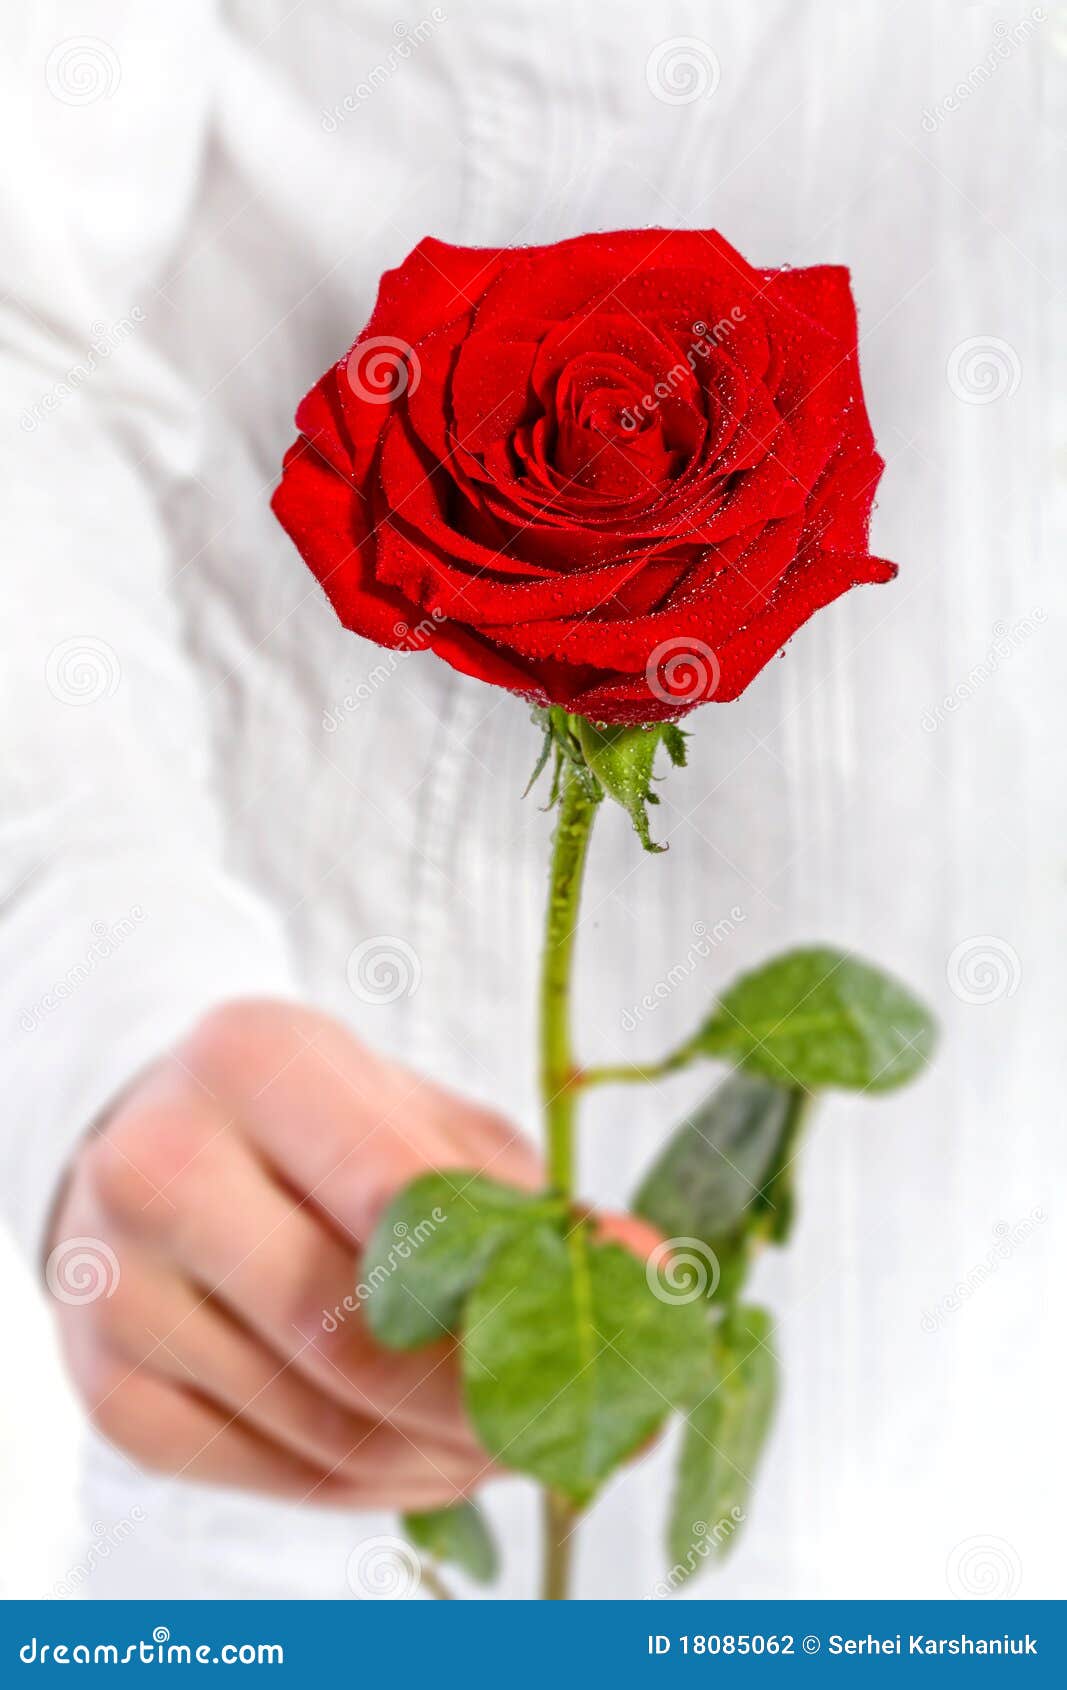 Man Hand Holding One Red Rose Stock Photo - Image of plant, bunch: 18085062